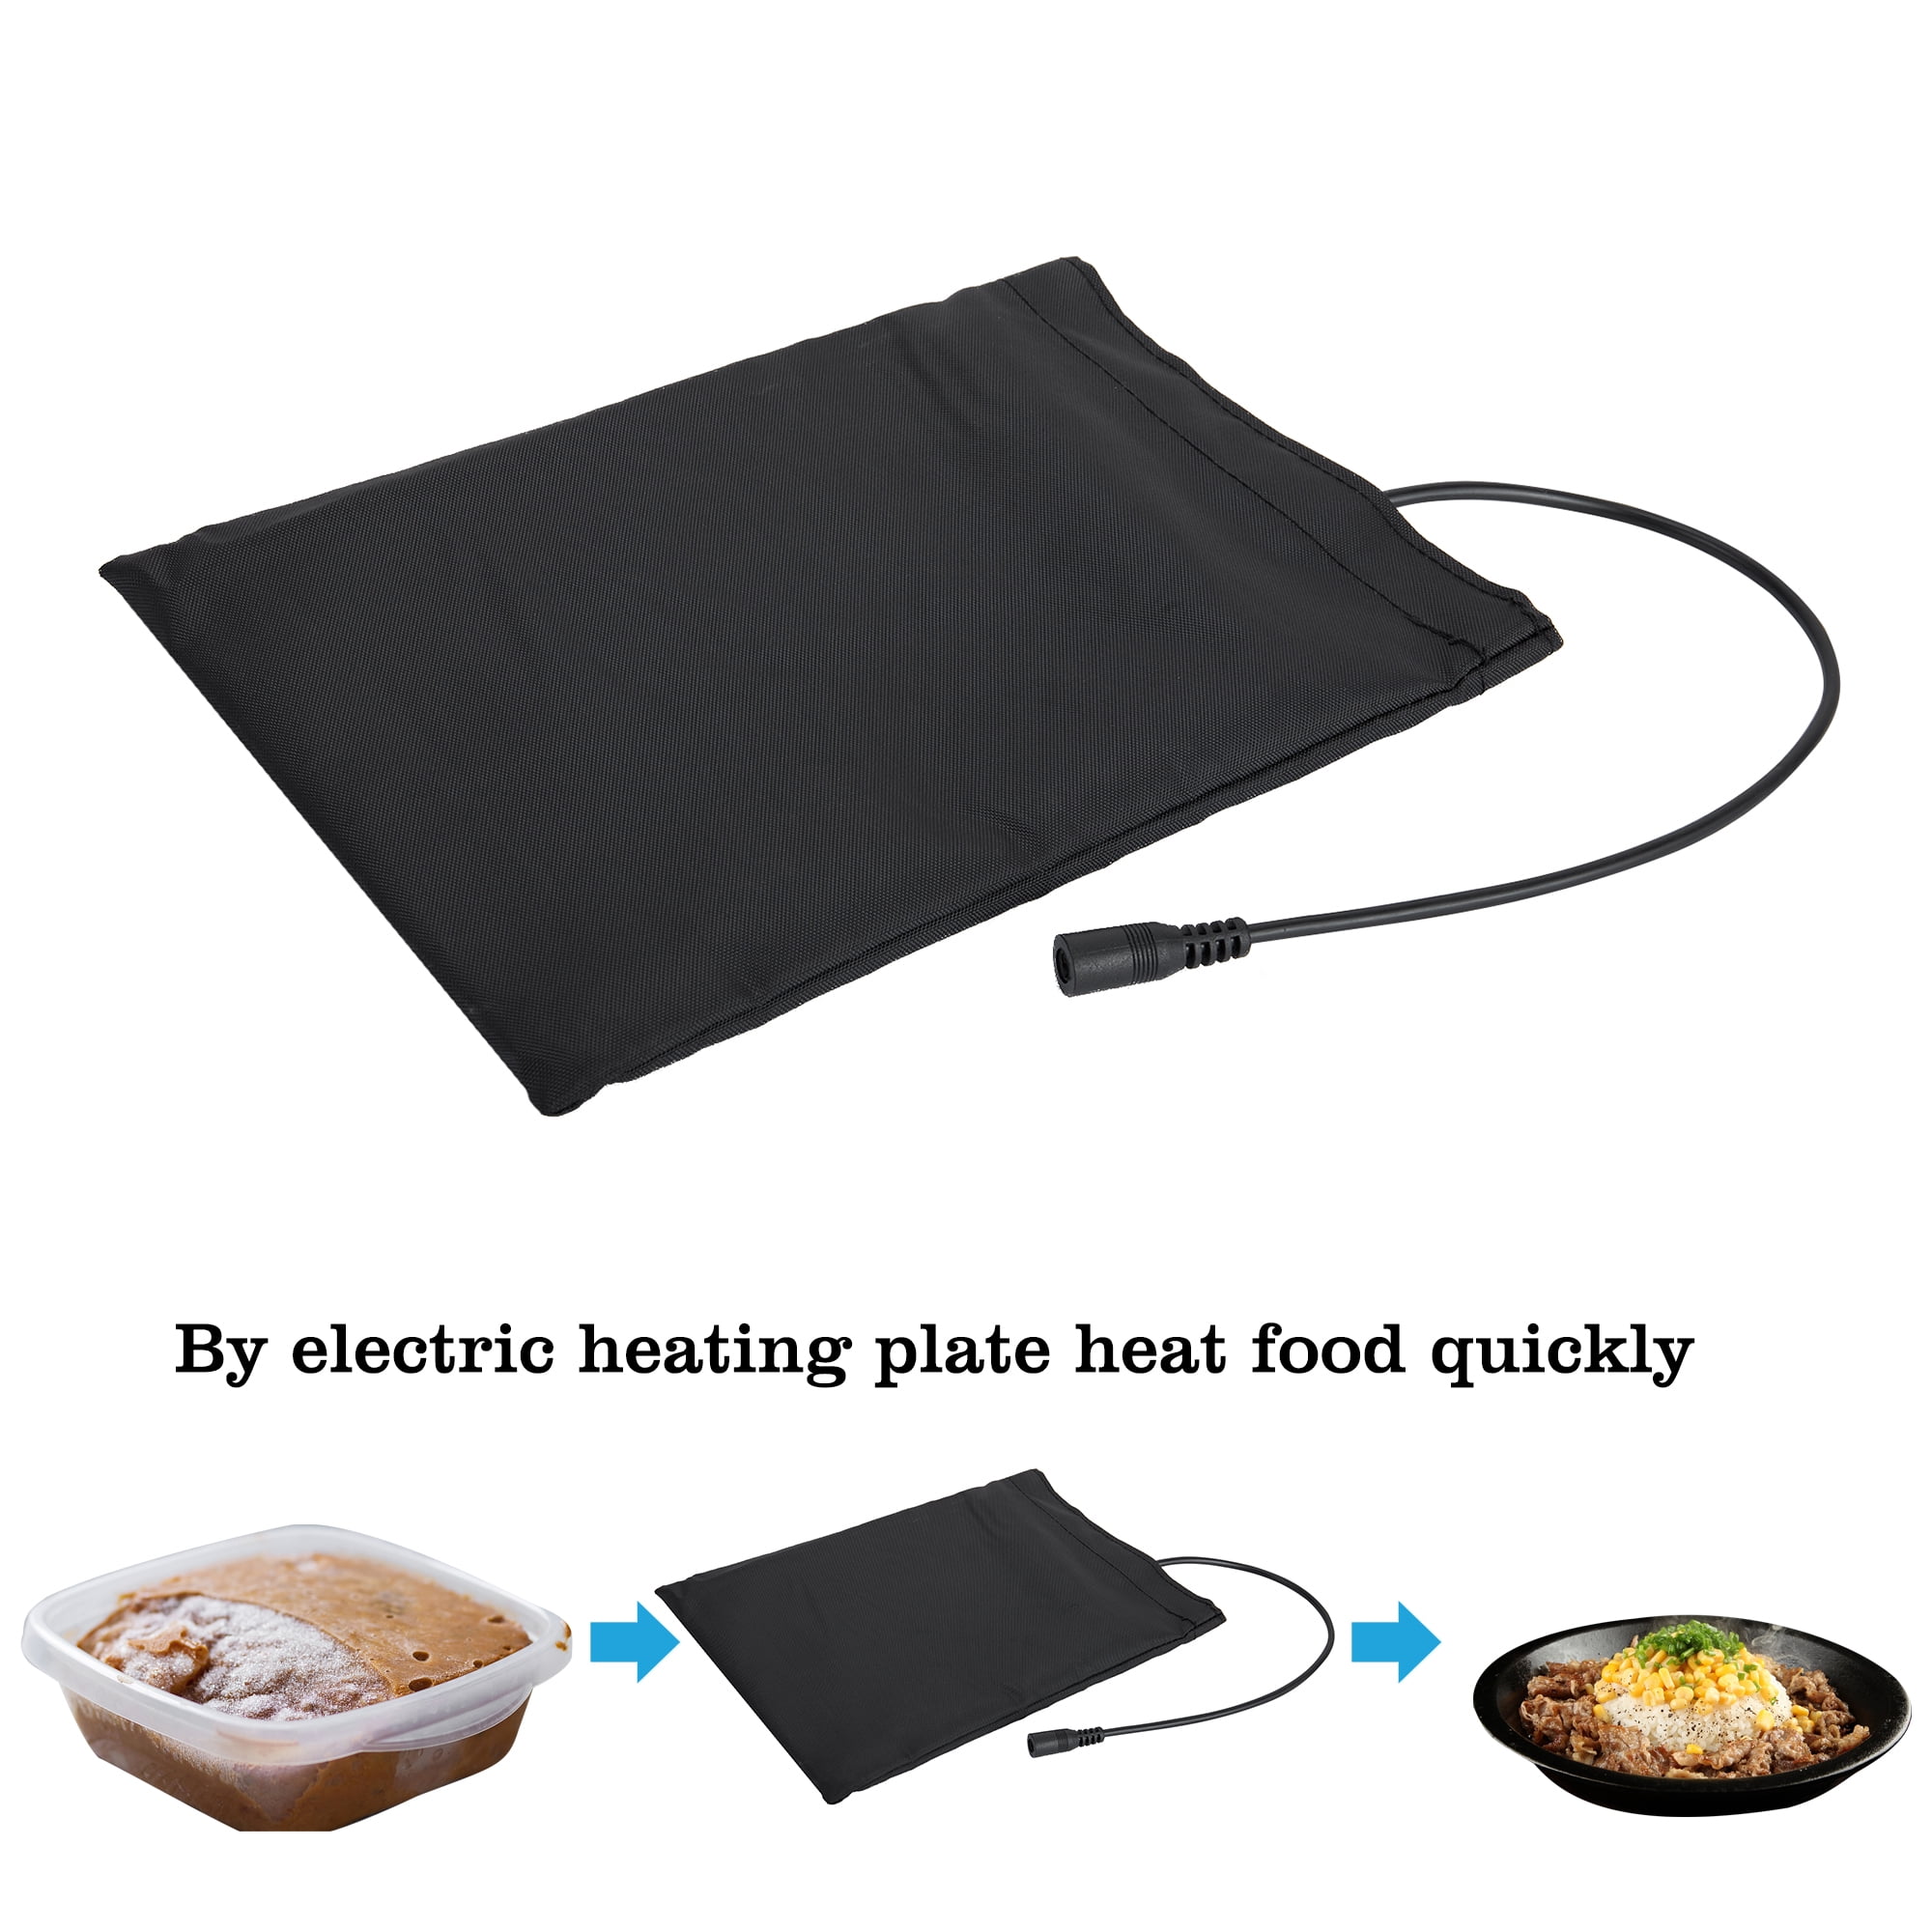  Portable Oven, 12V Car Food Warmer Portable Personal Mini Oven  Electric Heated Lunch Box for Meals Reheating & Raw Food Cooking for Road  Trip/Camping/Picnic/Family Gathering(Black): Home & Kitchen